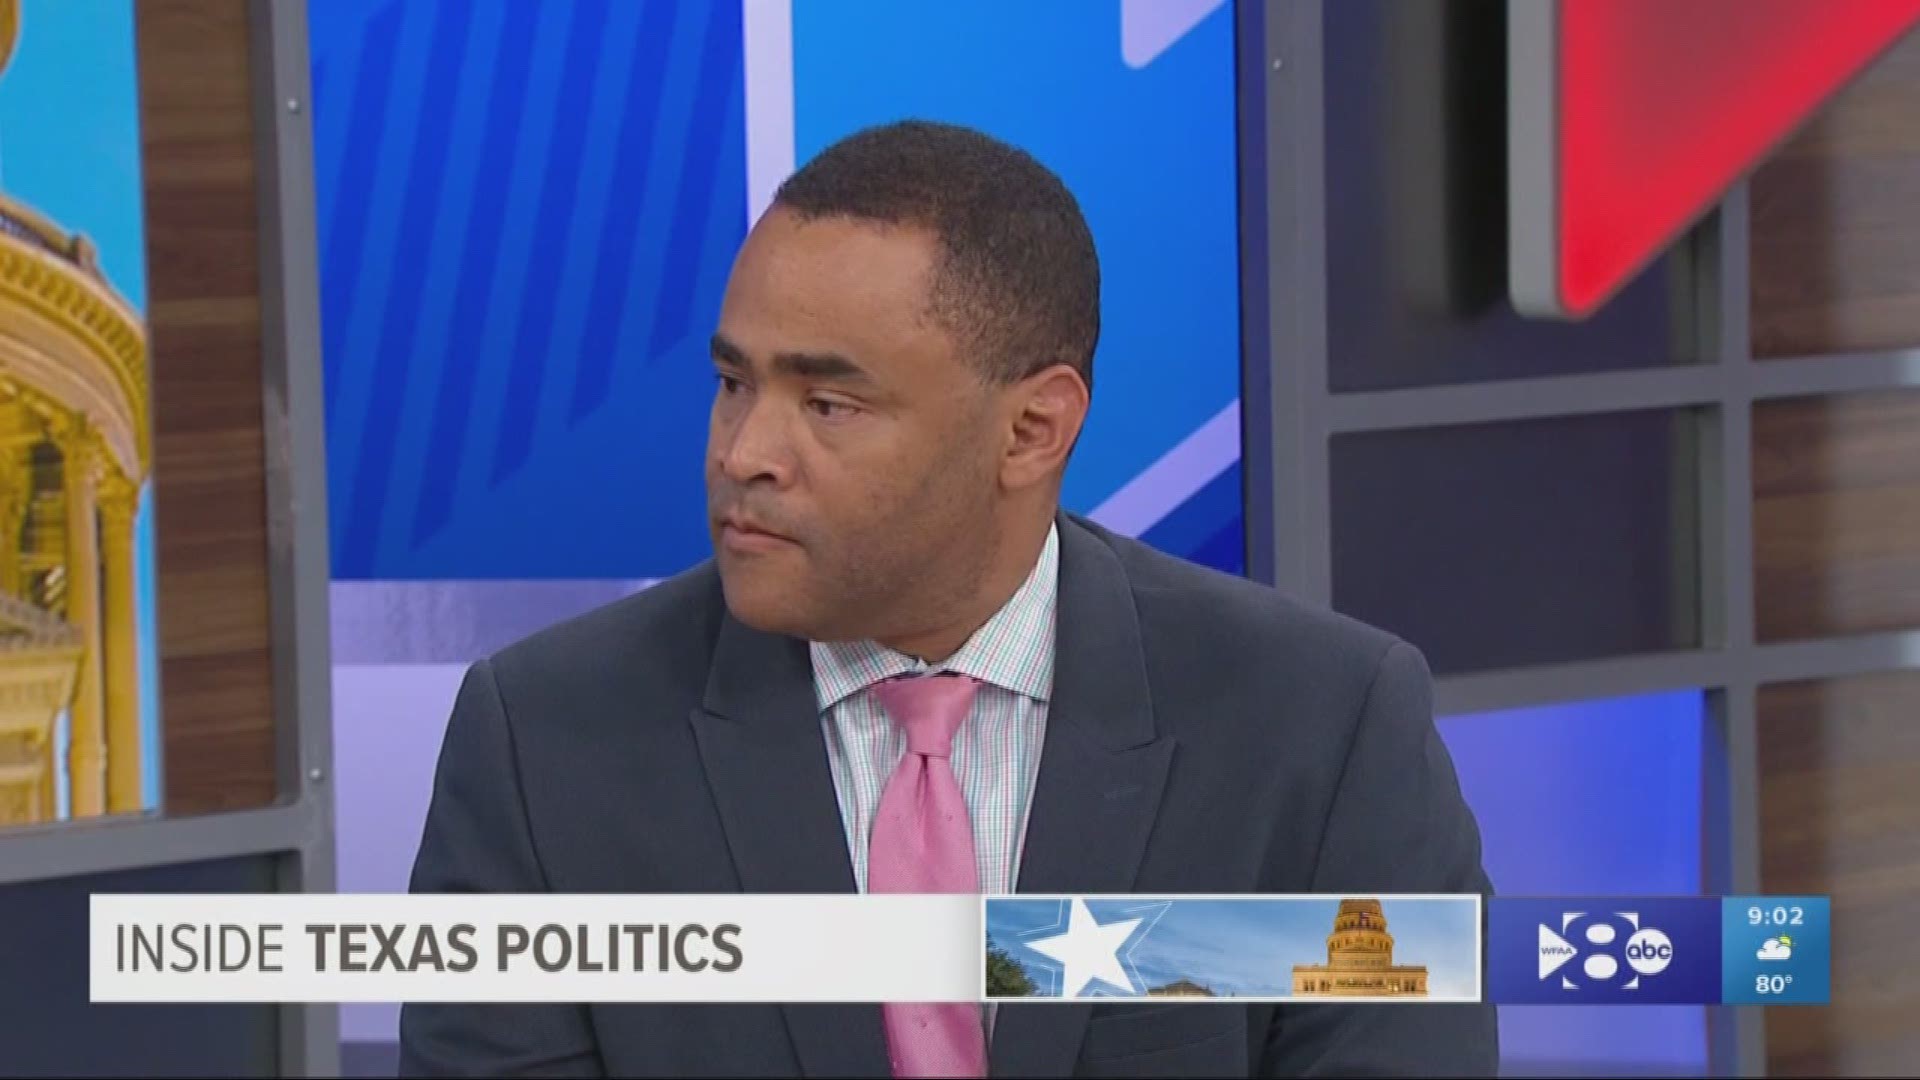 Democratic U.S. Representative Marc Veasey (TX-Dist. 33) predicted a Democratic landslide regardless of who is the Democratic nominee for president. He joined host Jason Whitely and Bud Kennedy, from the Fort Worth Star-Telegram, to discuss why the Democrats will beat President Trump. Congressman Veasey also talked about his effort to get a new veterans hospital in North Texas.